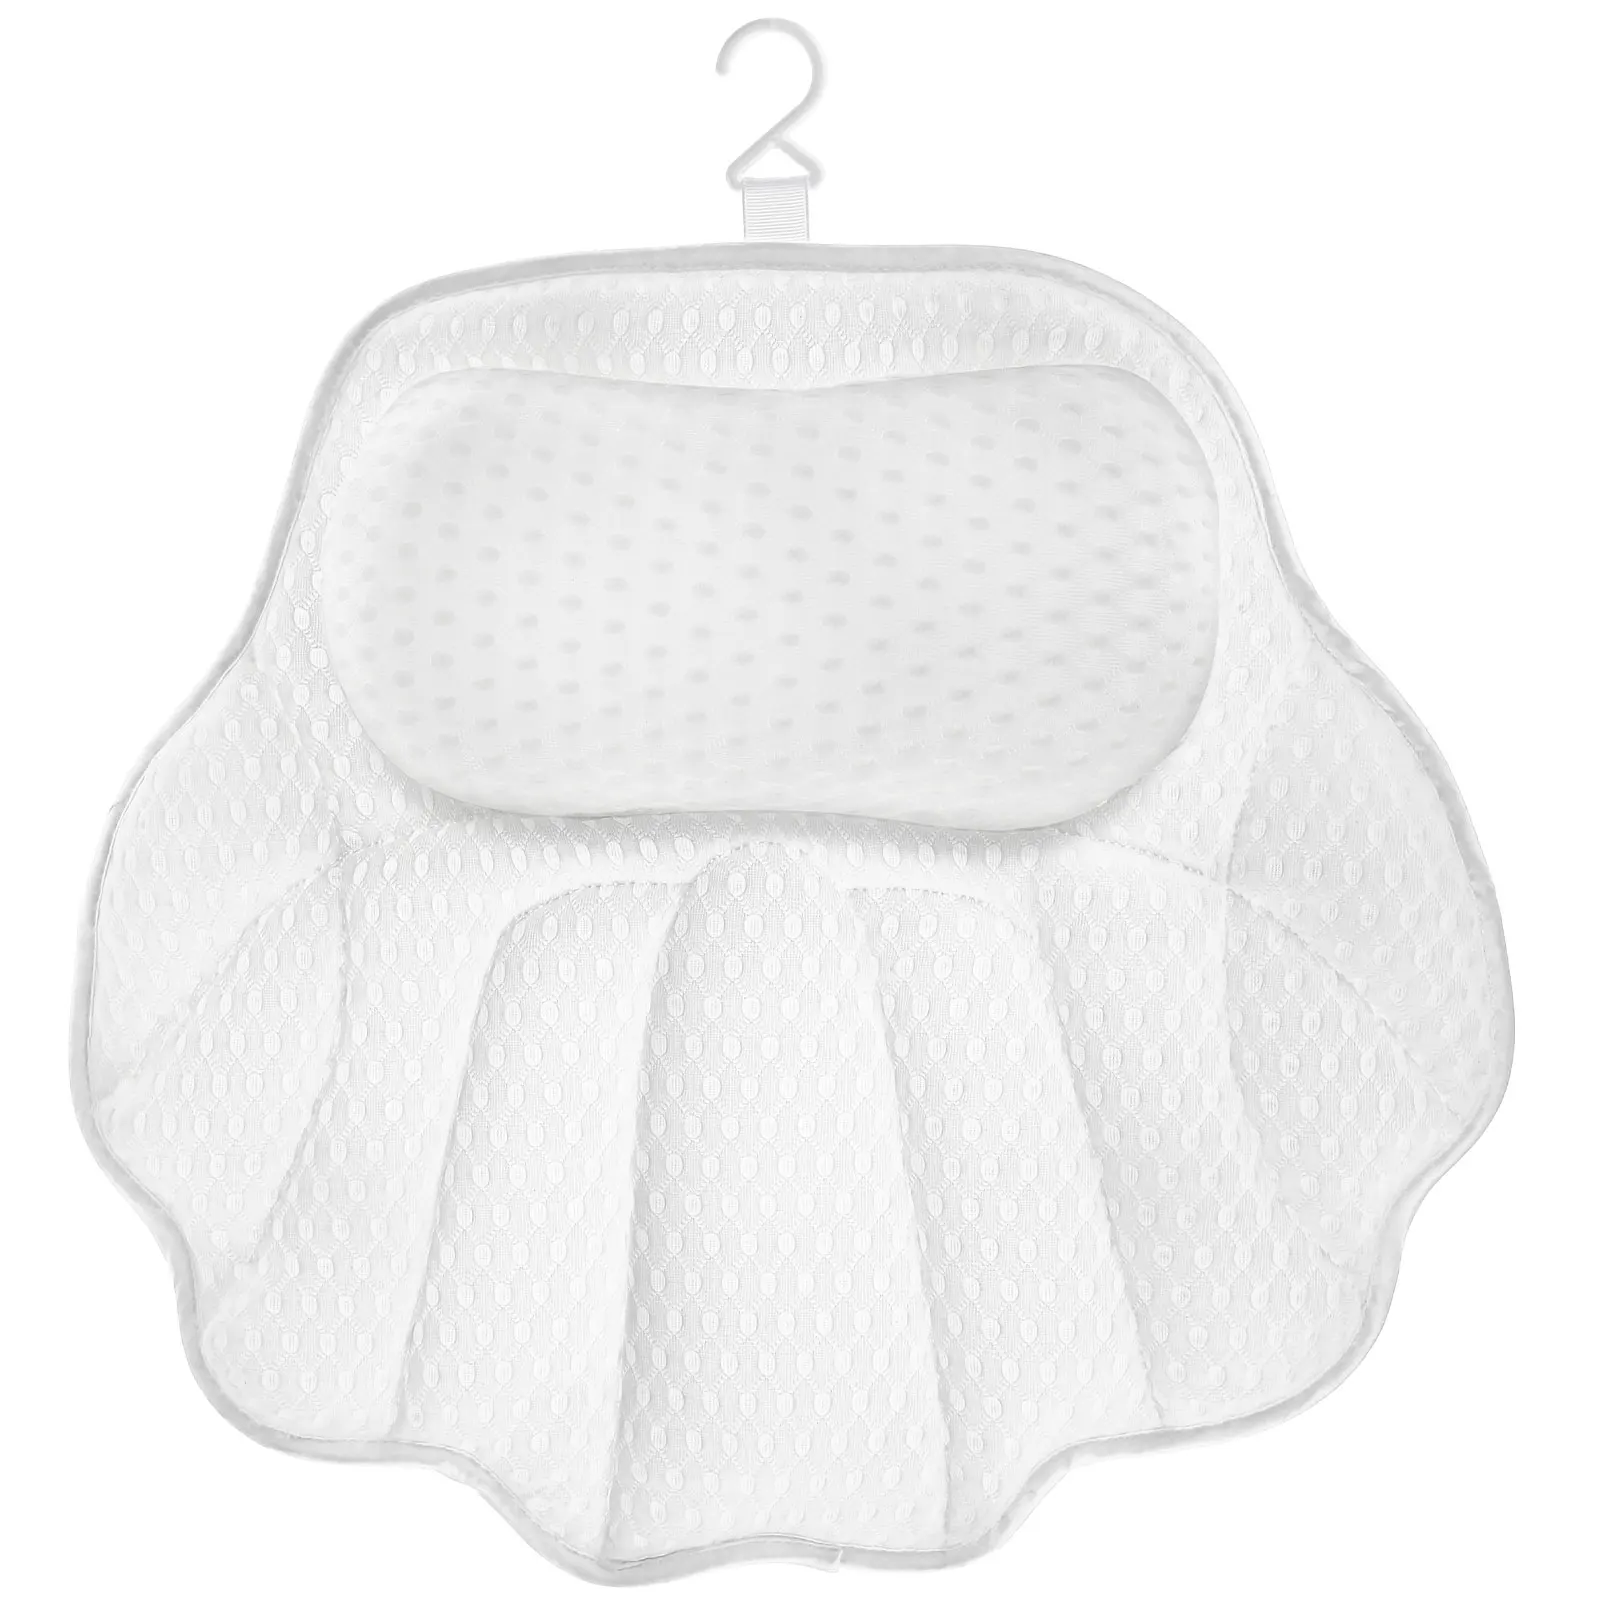 

Bath Pillow Breathable Bathtub Pillow with 6 Anti-Slip Suction Cups 4D Mesh Soft Spa Bath Tub Pillow with Neck and Back Support